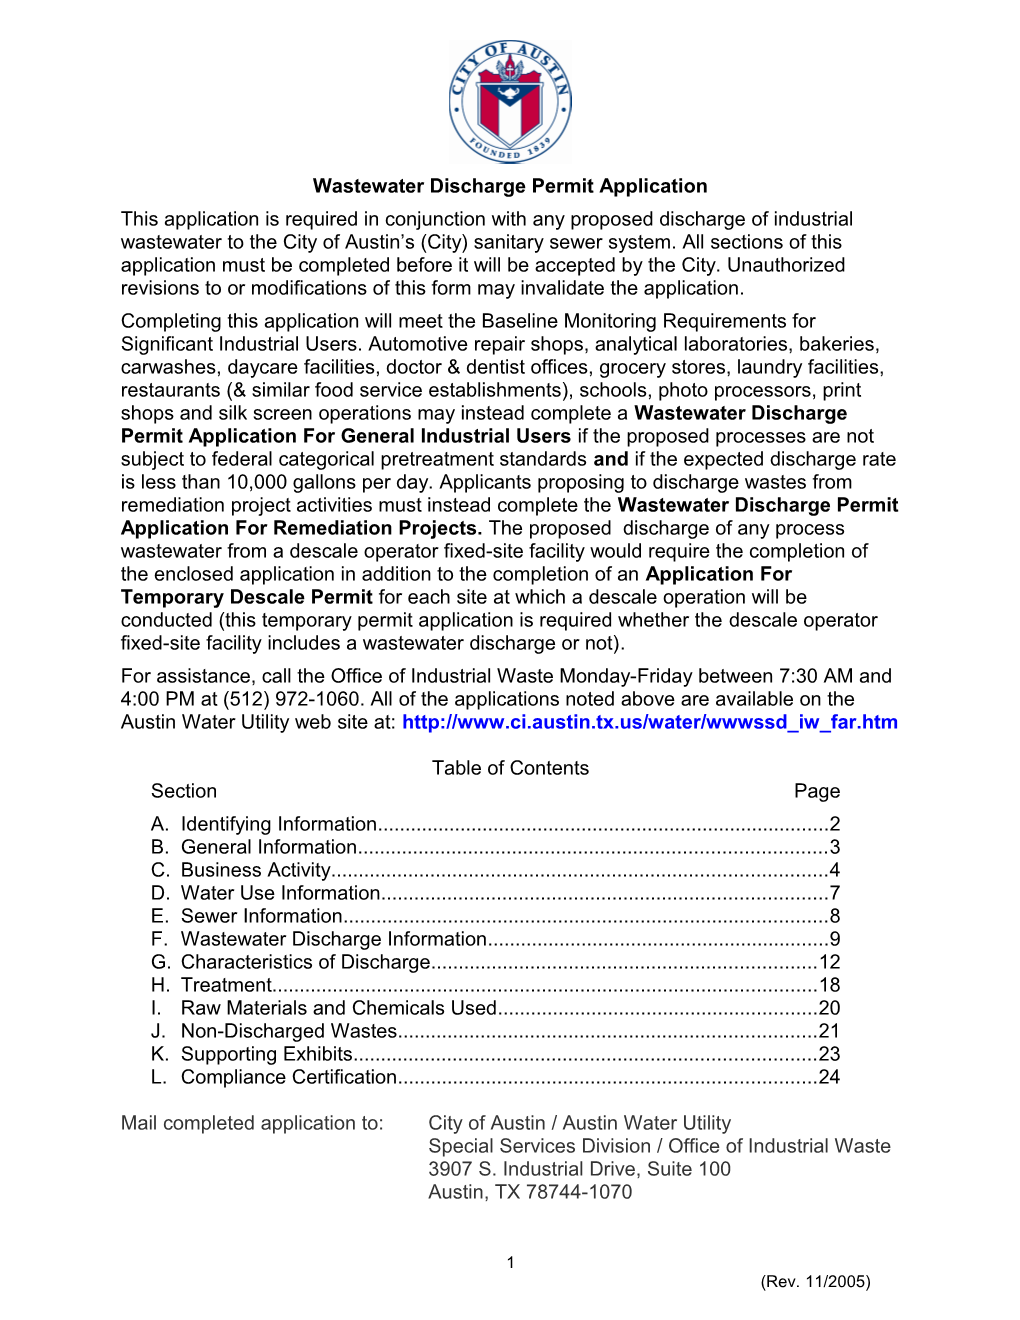 Application for Wastewater Discharge Permit